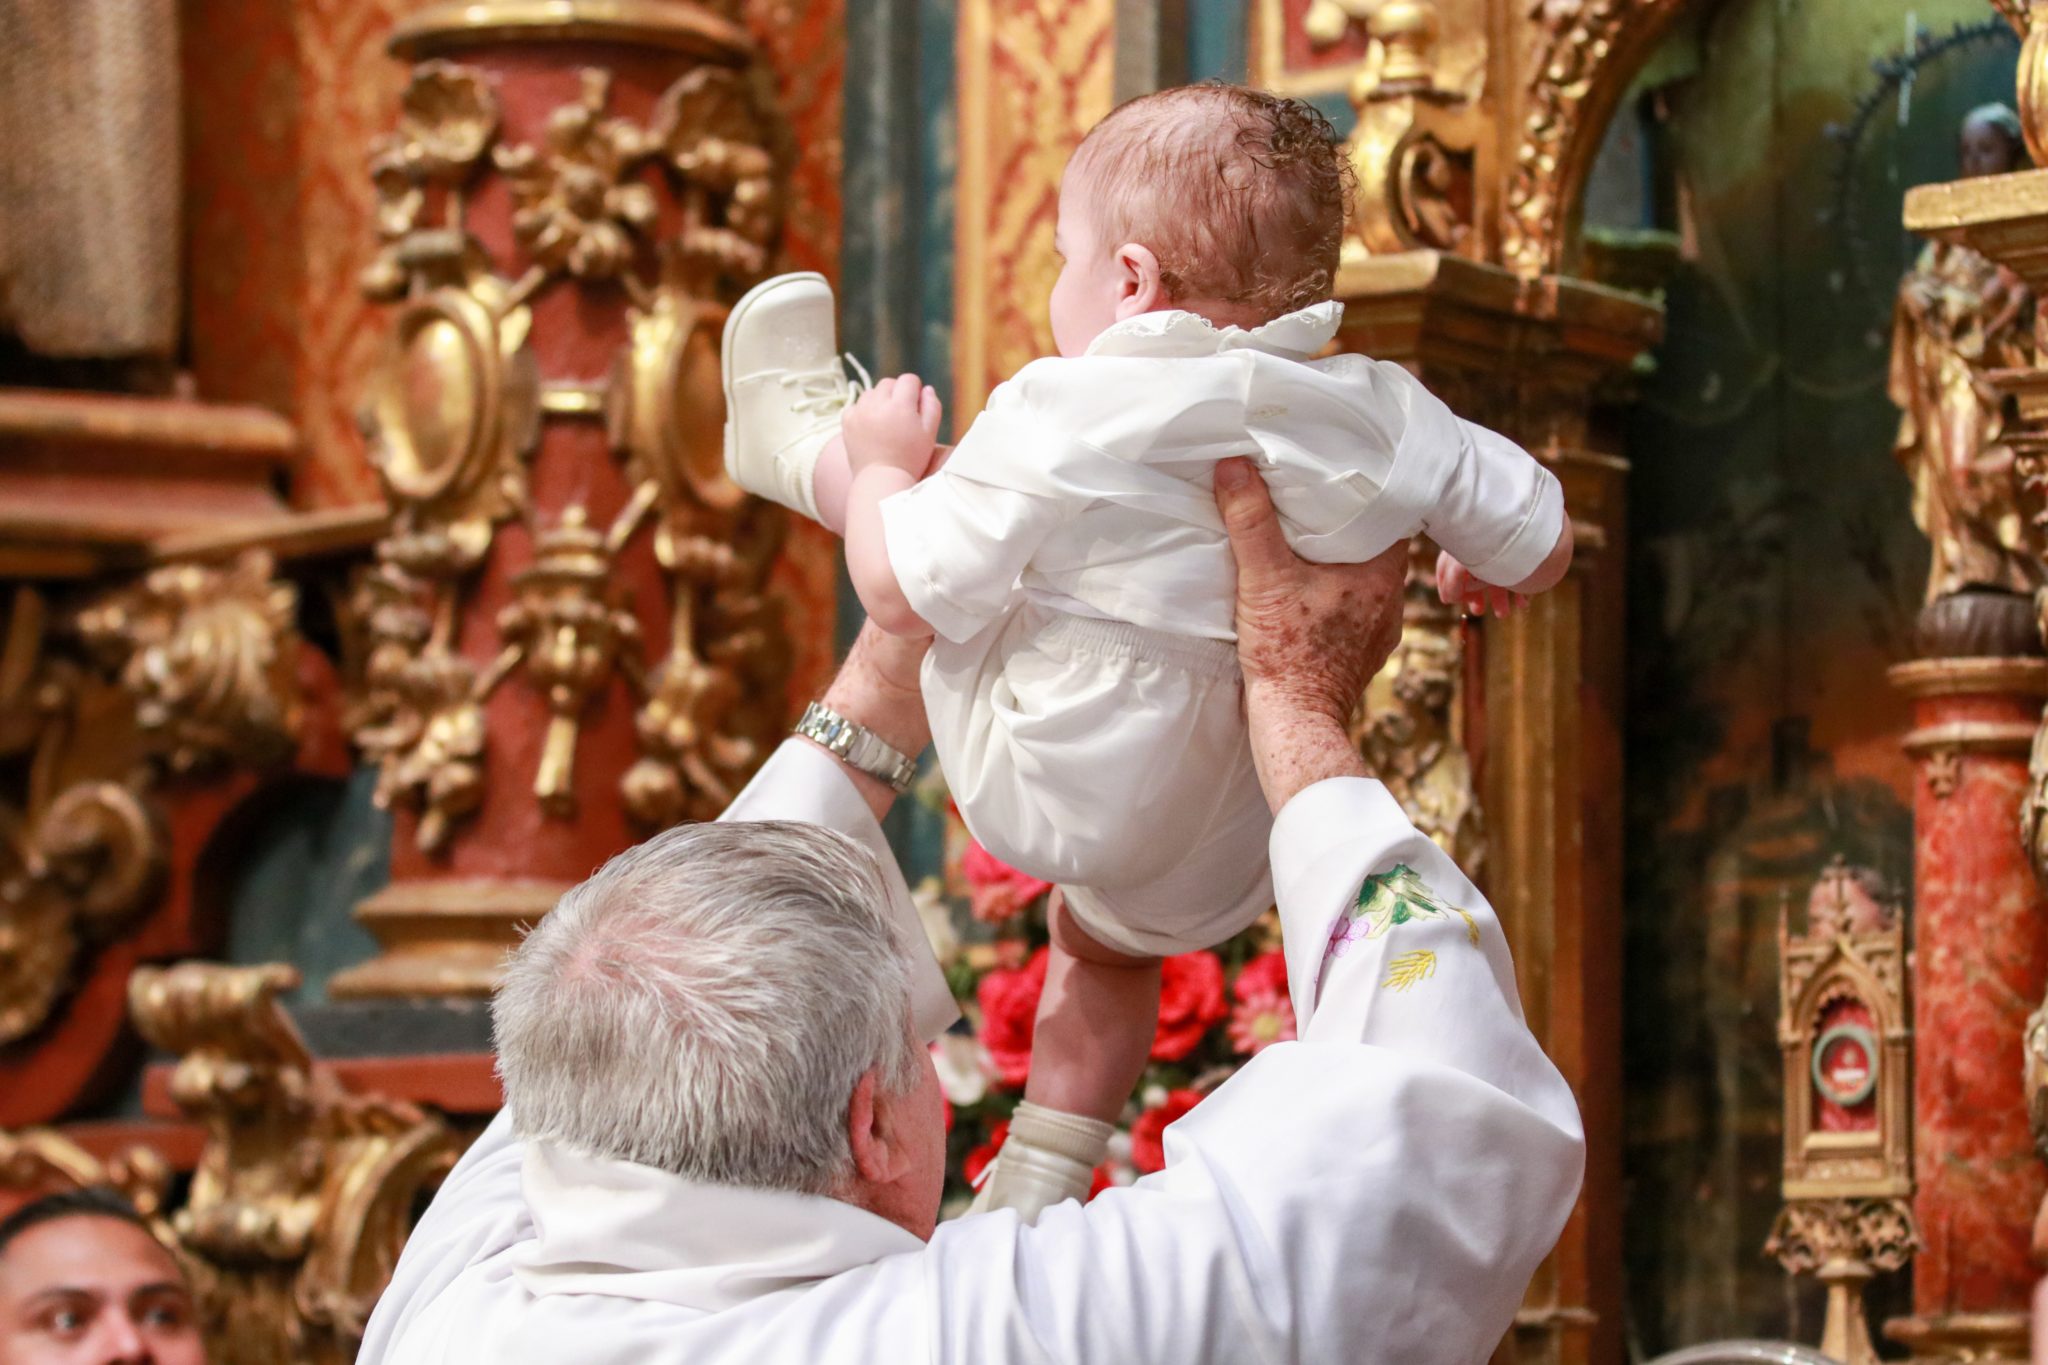 man in white dress shirt carrying baby in white dress